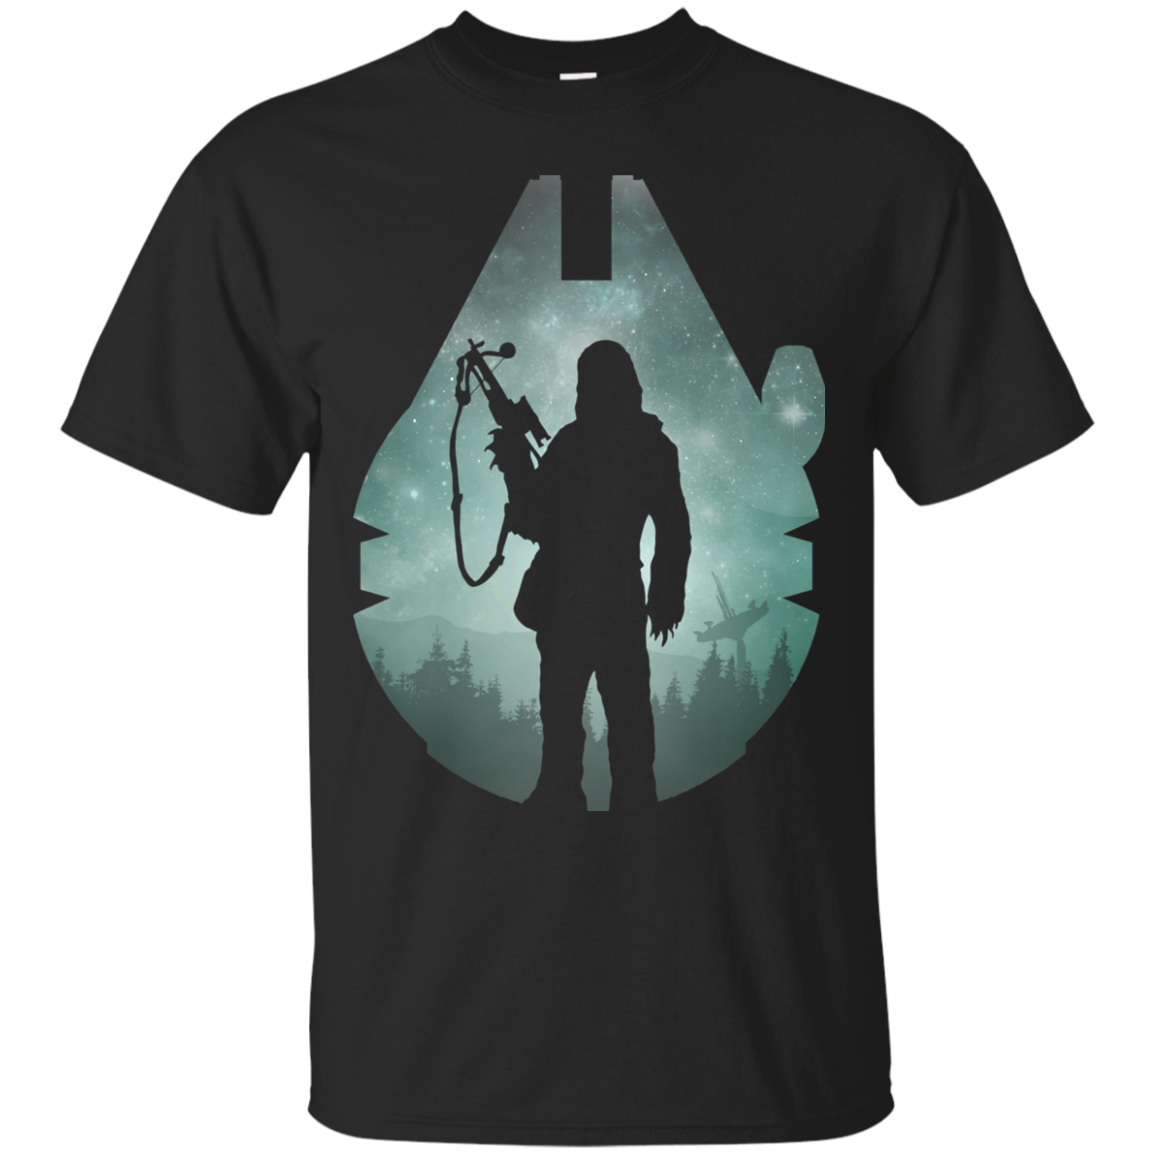 The Wookiee T-Shirt